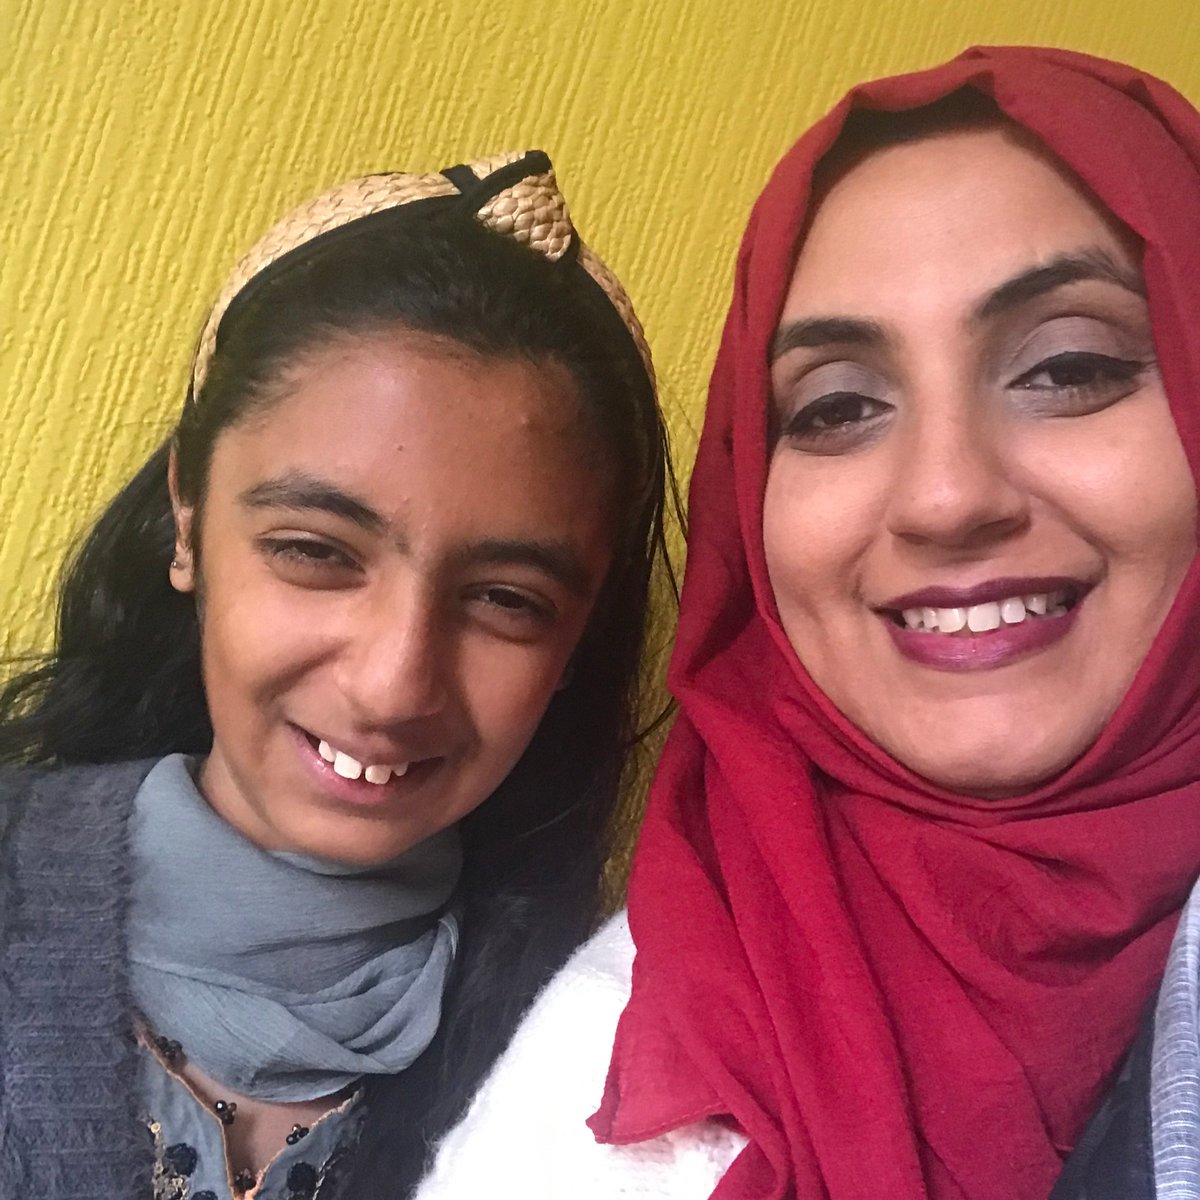 ‘If you are struggling, please don’t suffer alone.' After a complicated birth, Sobhia reached out for help with her anxiety and postnatal depression, and now helps other new mums at @bsmhft. Find out more about the support available: nhs.uk/pregnancy/keep…